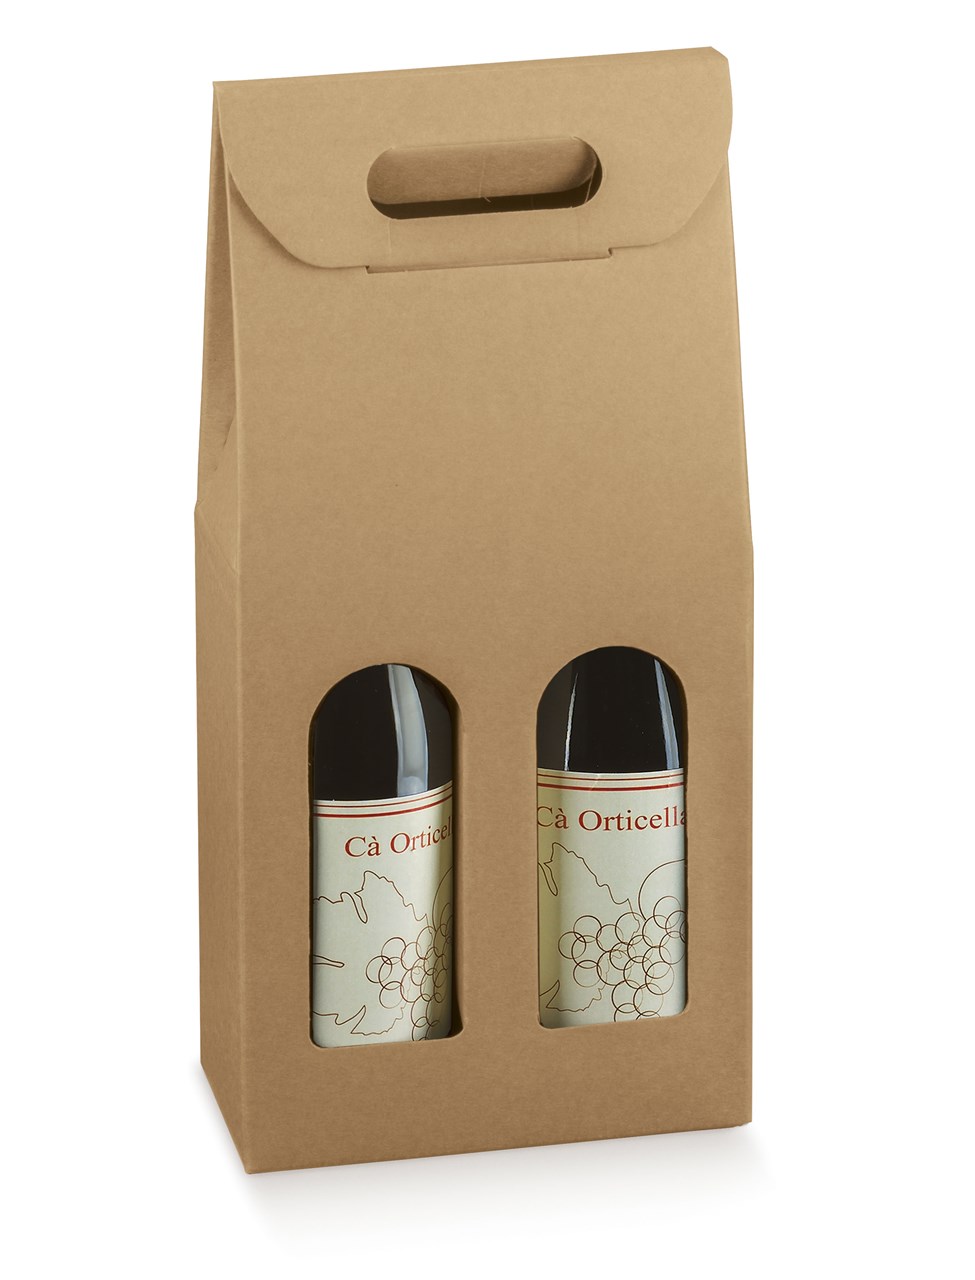 Picture of Rustic Kraft Wine Duo Bottle Box with Windows